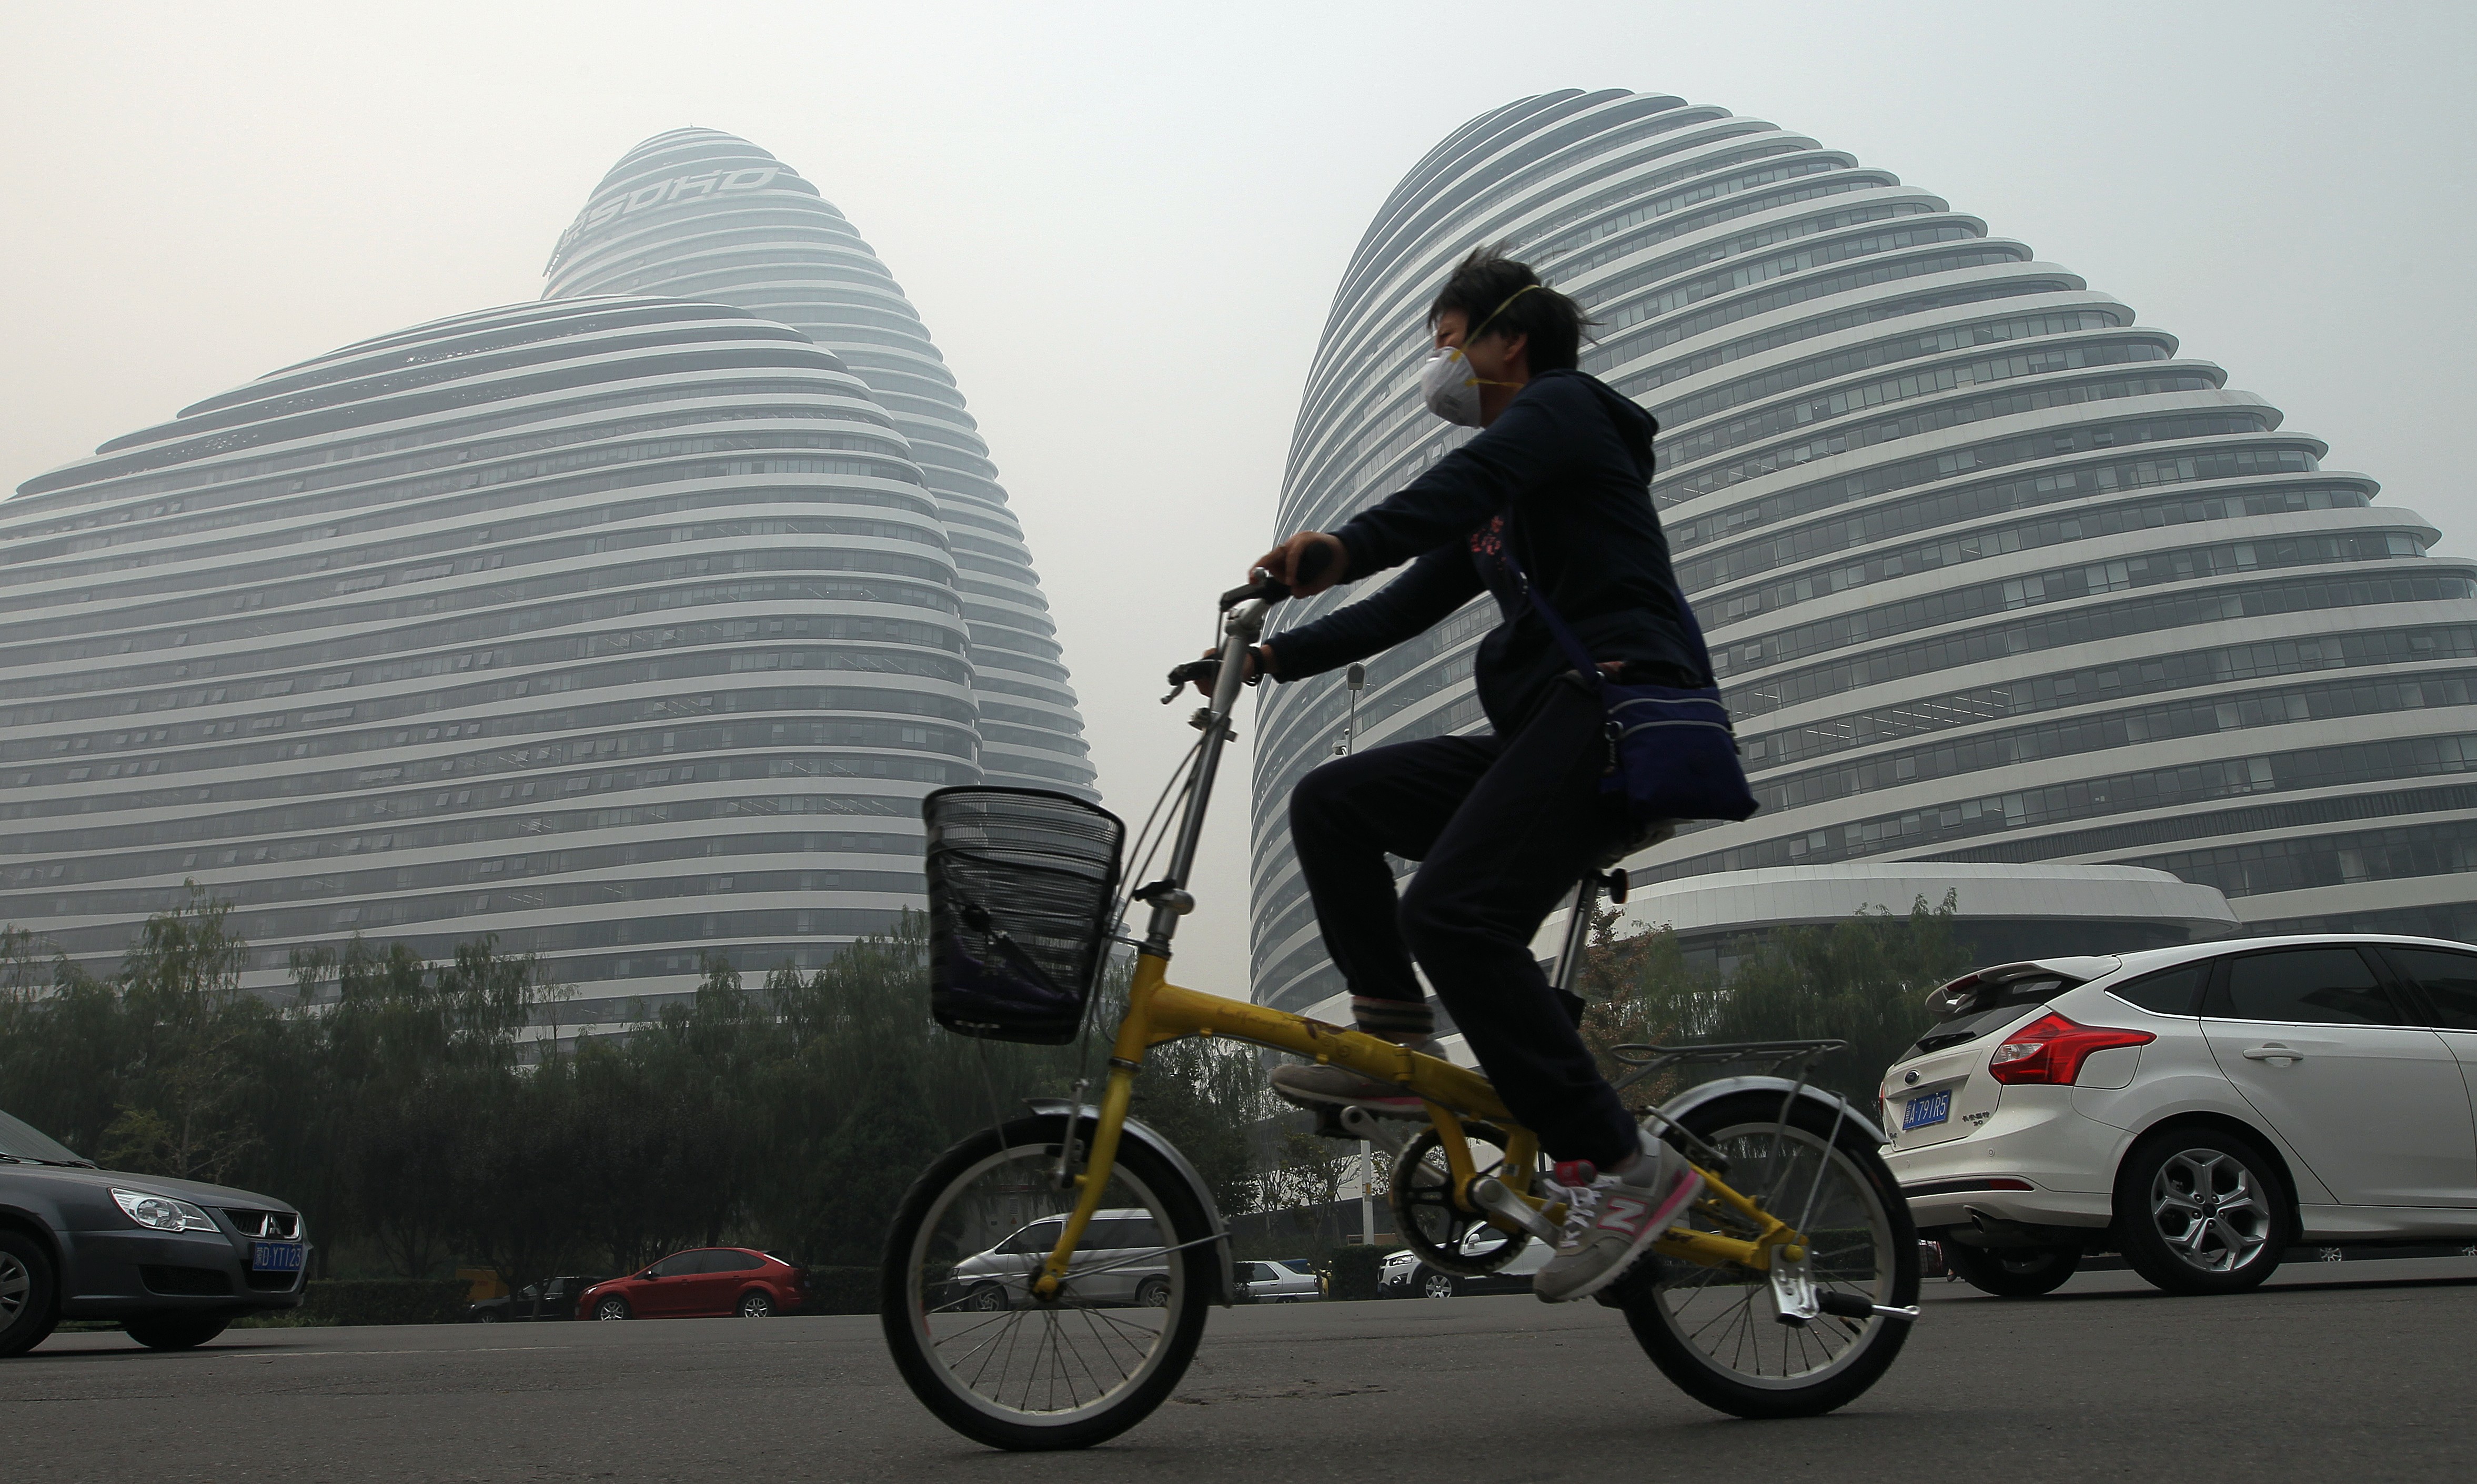 A woman wearing mask rides a bike passing by the Wangjing SOHO office towers in Beijing on October 9, 2014. The office towers, designed by Iraqi-British architect Zaha Hadid, is one of the biggest cash cows for their developer Soho China. Photo: SCMP/Simon Song